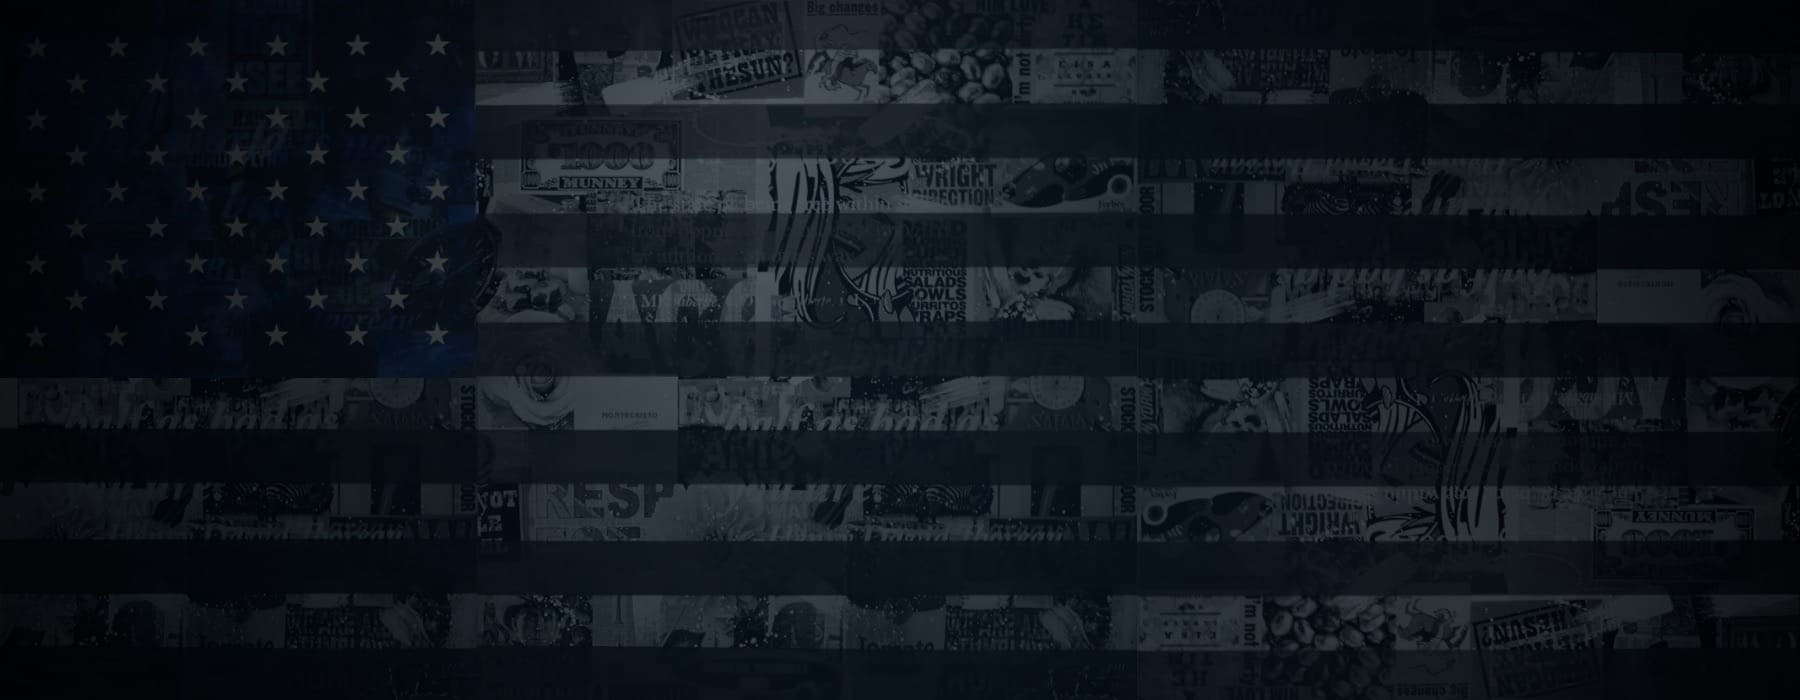 American Flag Image in dark black and blue tones and rich graphic icons embedded in the art